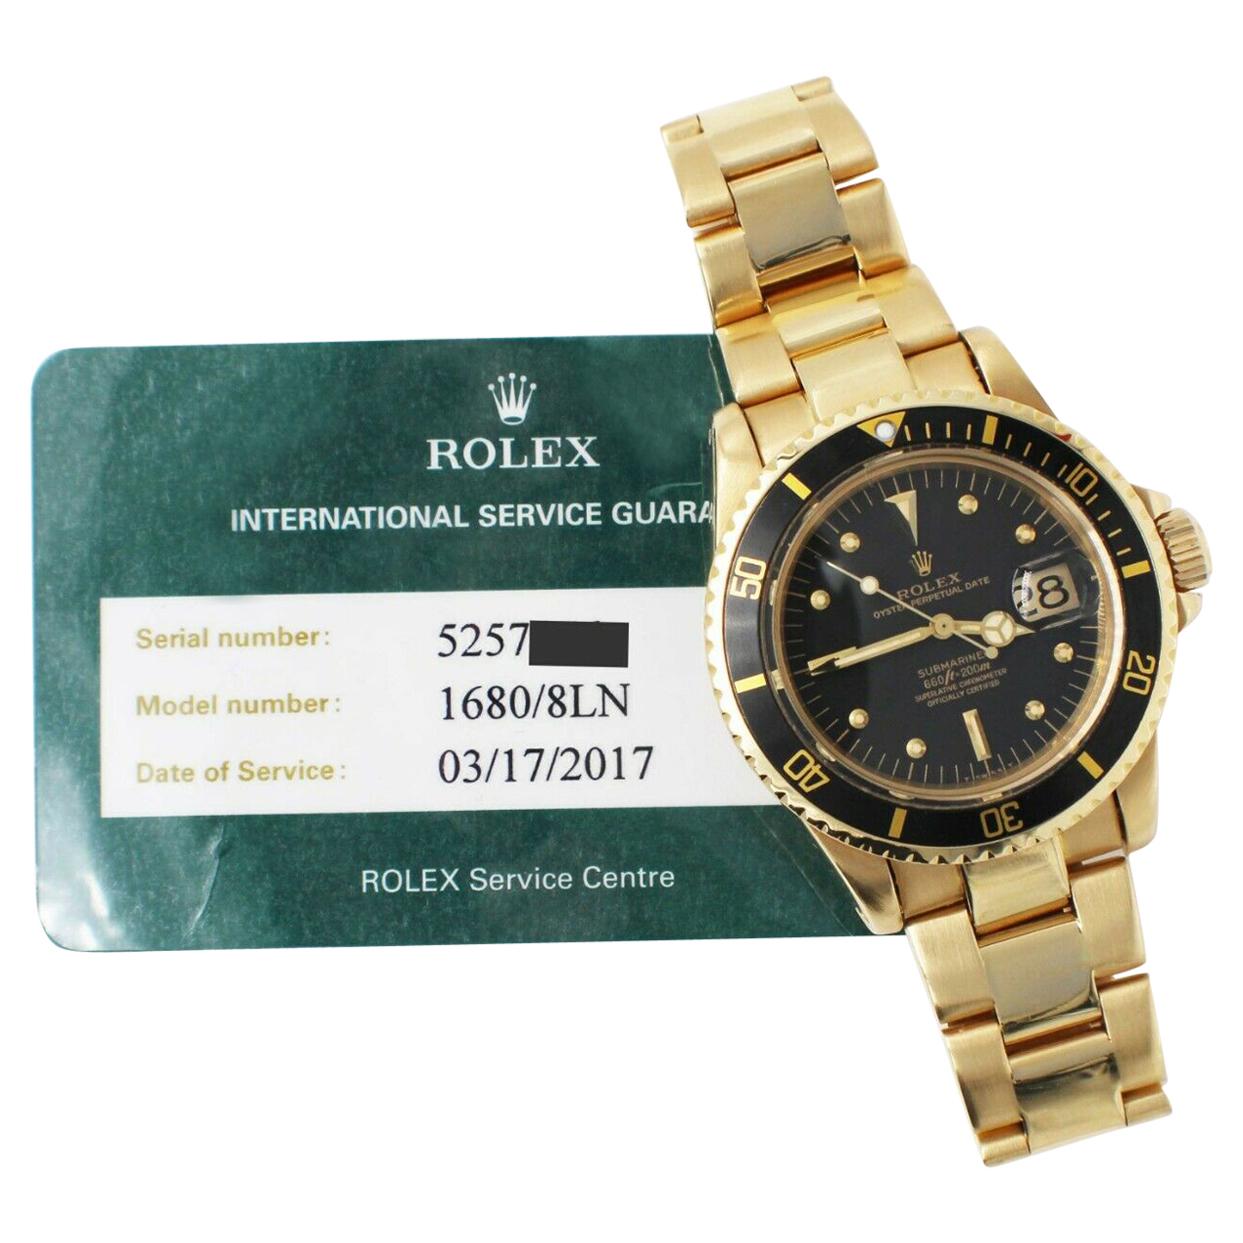 Style Number: 1680 

 

Serial: 5257***



Year: 1978

 

Model: Submariner 

 

Case Material: 18K Yellow Gold

 

Band: 18K Yellow Gold

 

Bezel: Black

 

Dial: Black Nipple Dial

 

Face: Acrylic 

 

Case Size: 40mm

 

Includes: 

-Rolex